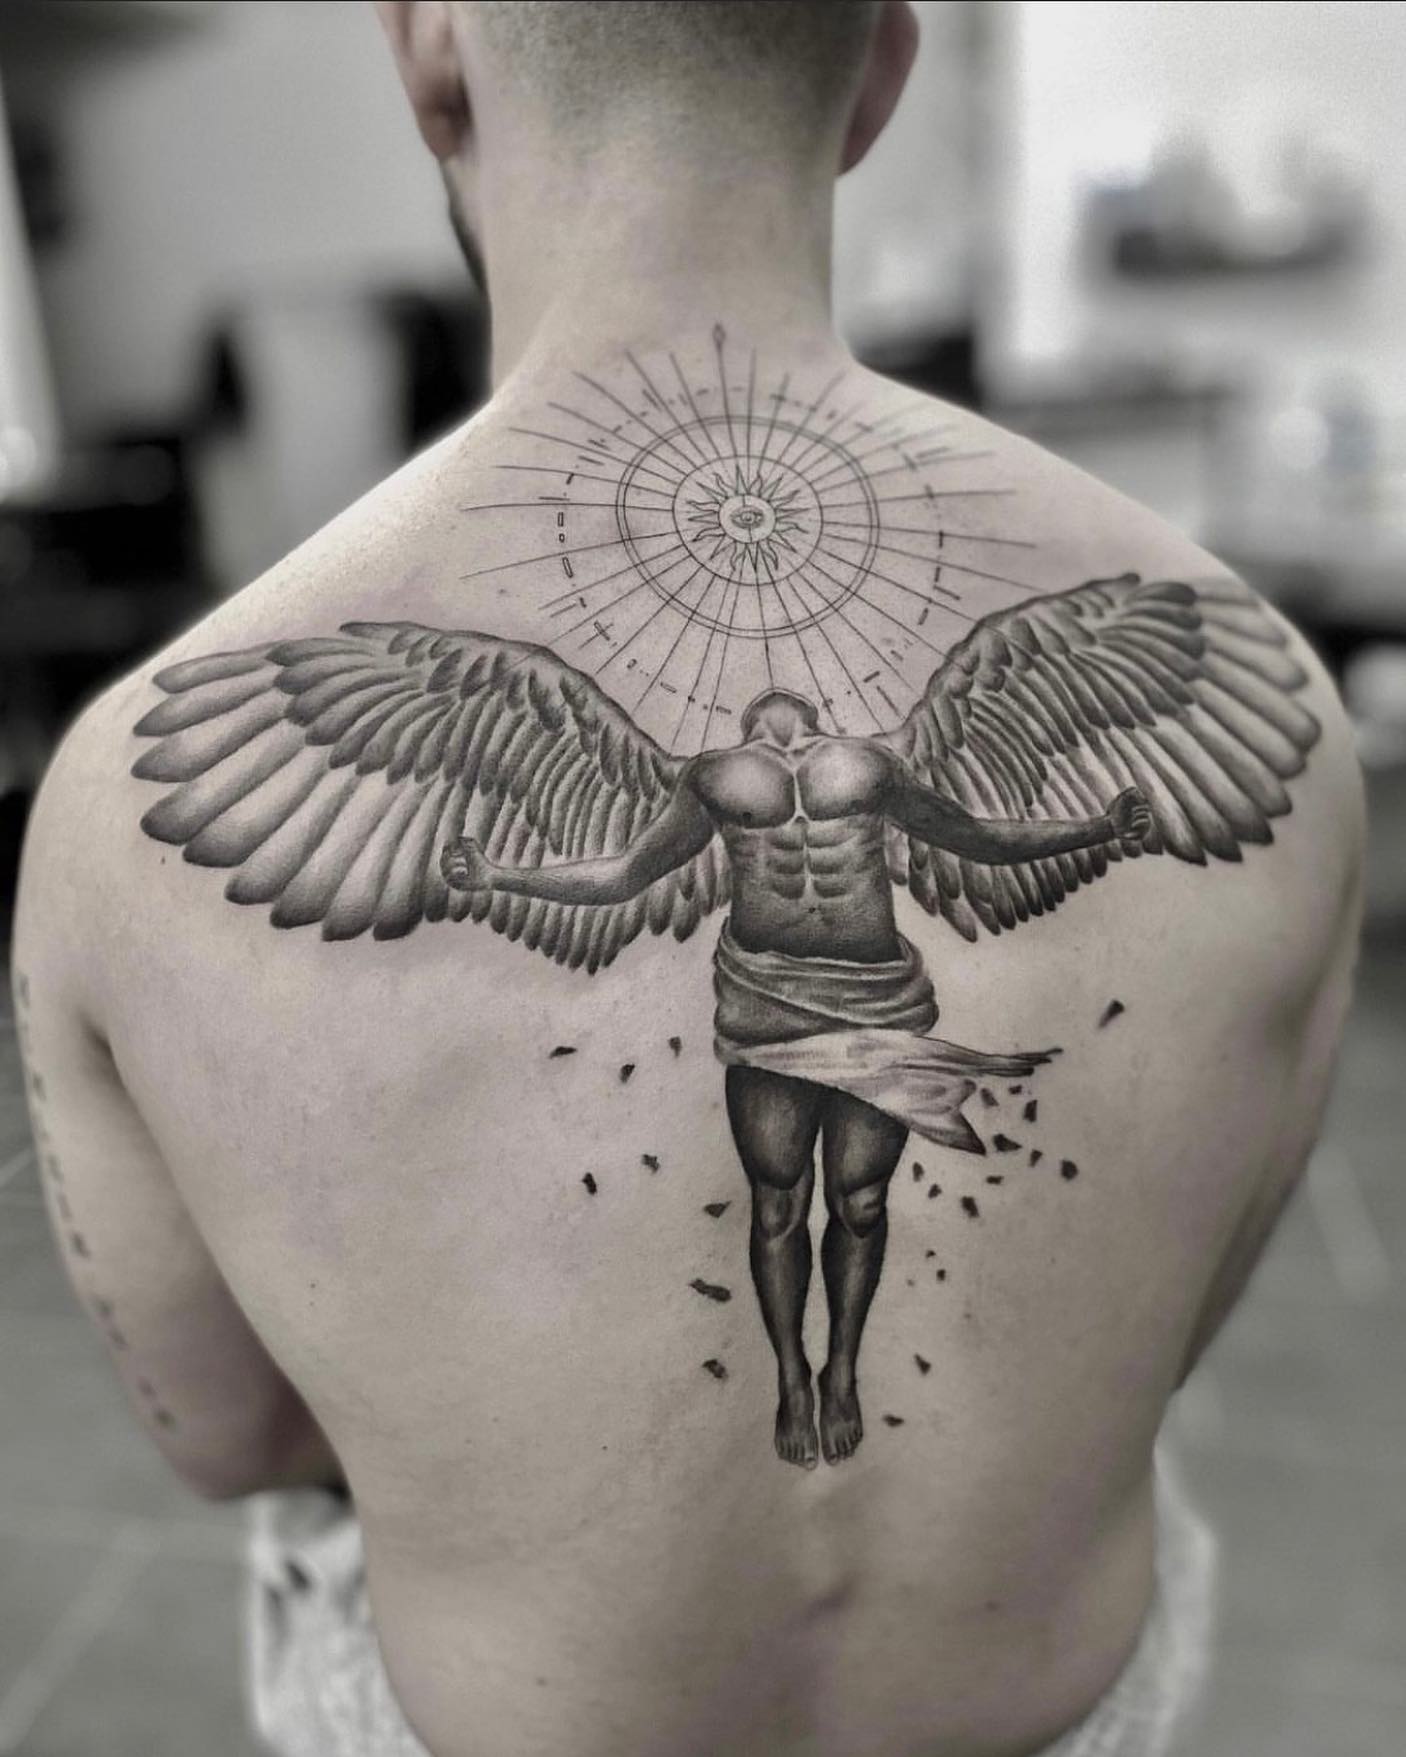 The Fascinating Icarus Tattoo Meaning Discover the Meaning Behind Icarus  Tattoo Designs  Impeccable Nest